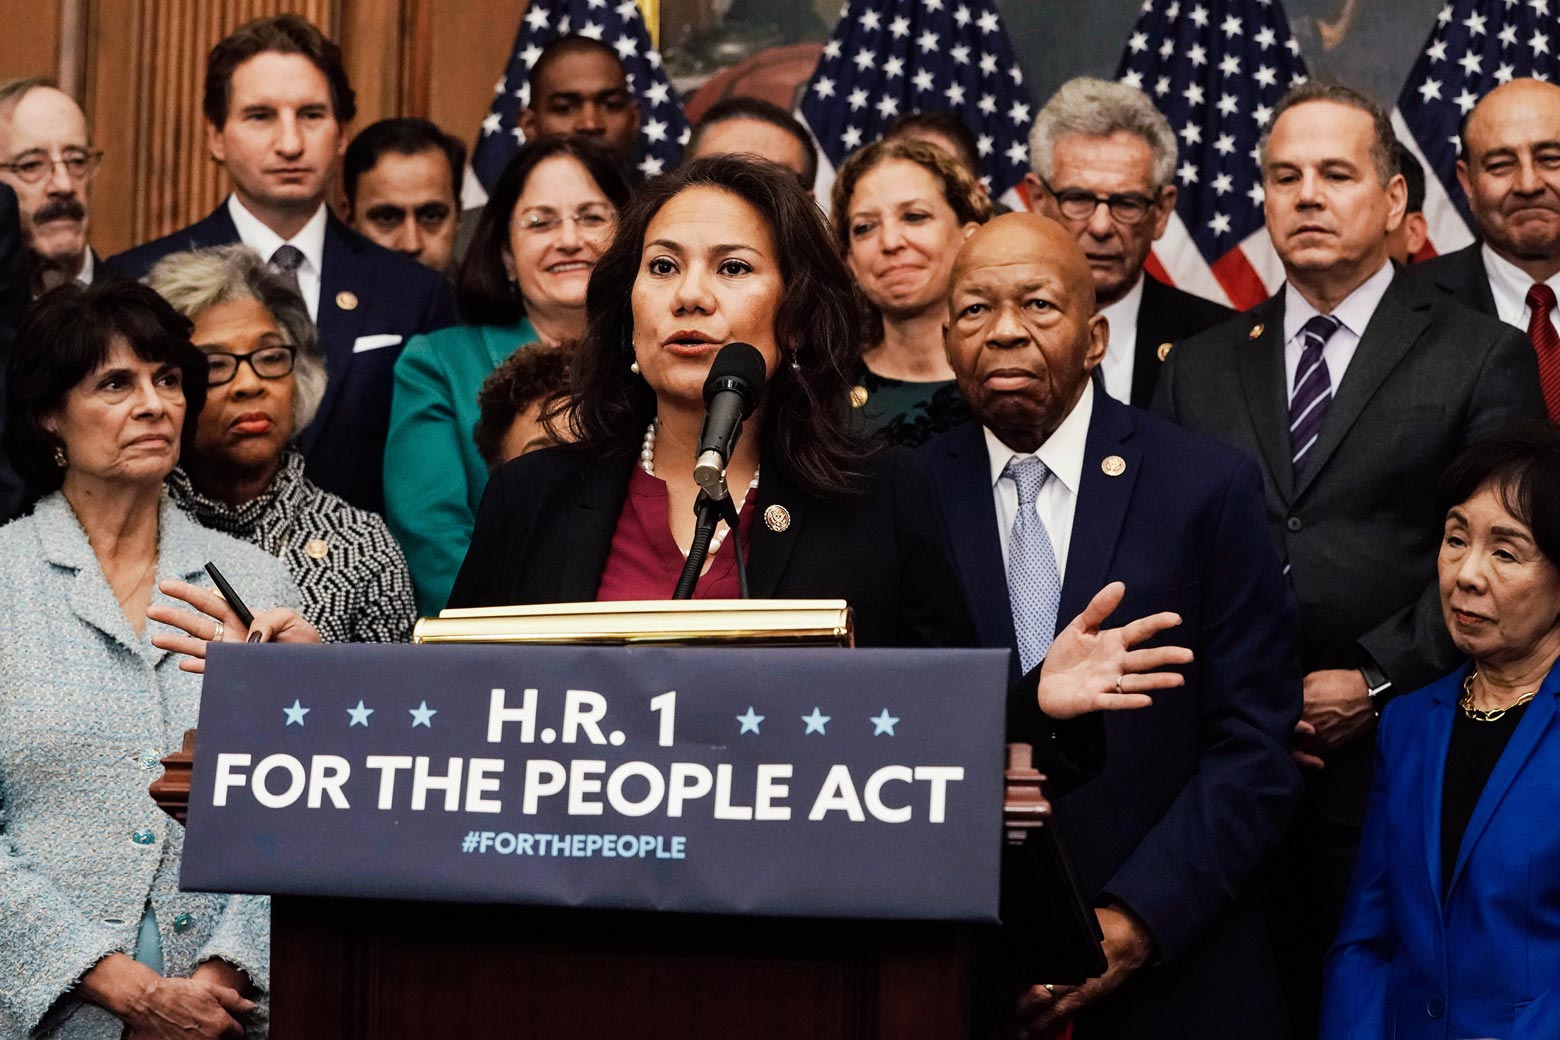 Veronica Escobar speaks from behind a podium that says, "H.R. 1: For the People Act," surrounded by colleagues.